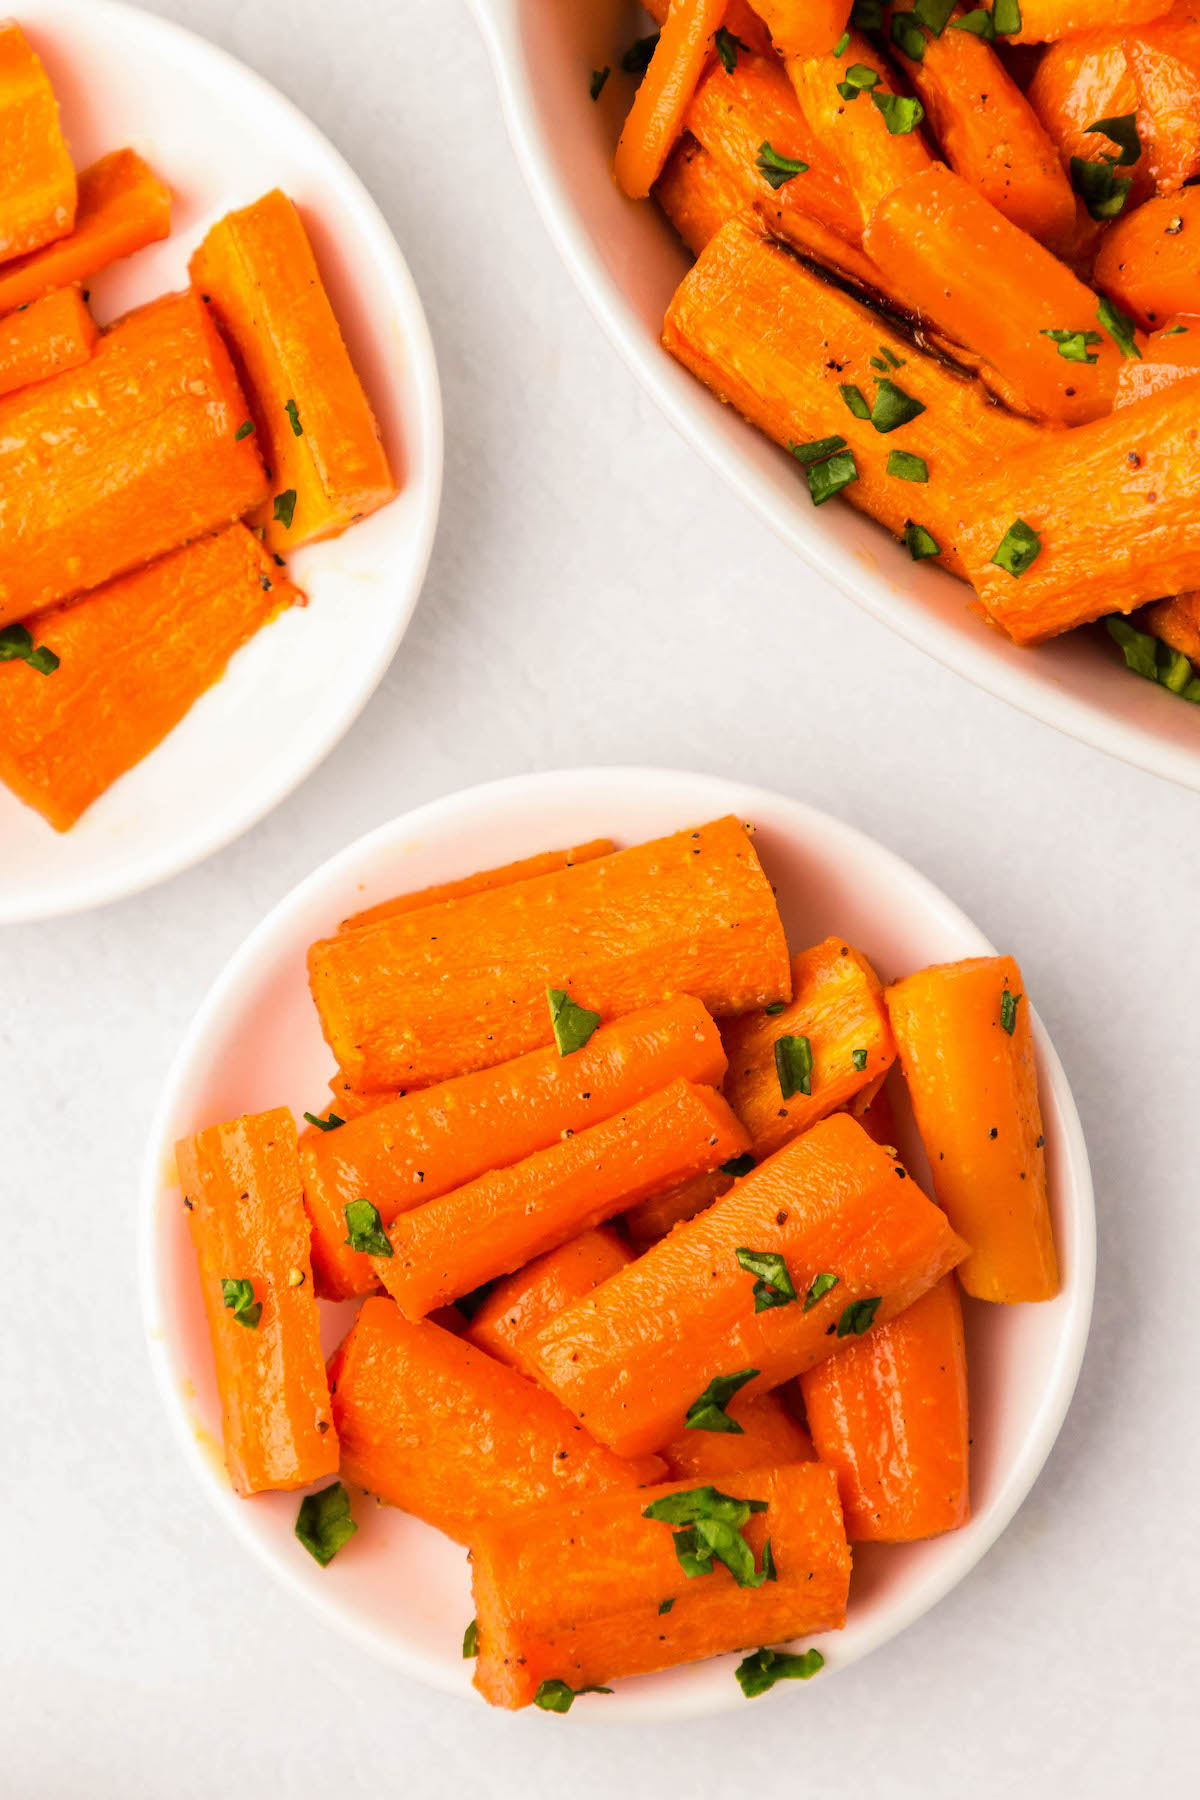 Honey roasted carrots with parsley in a white bowl